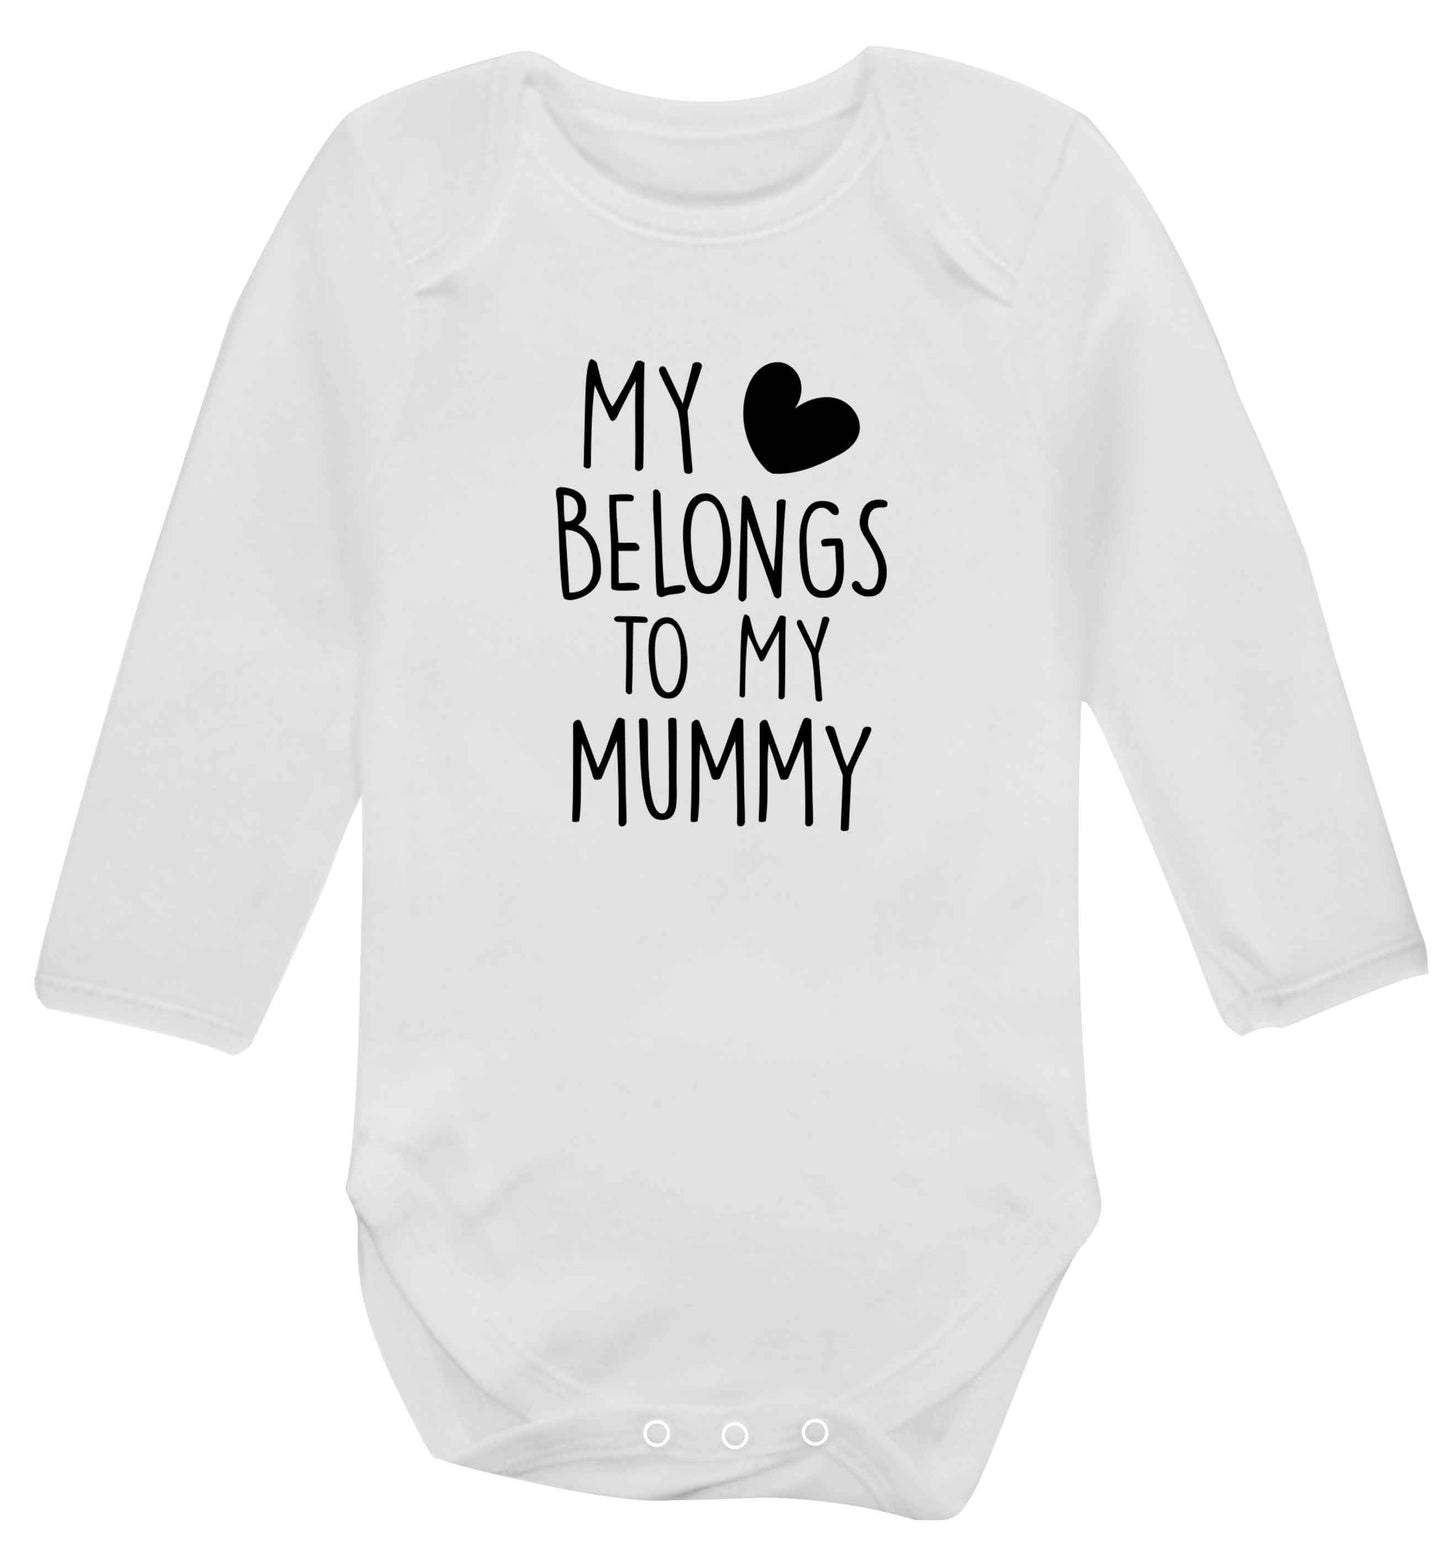 My heart belongs to my mummy baby vest long sleeved white 6-12 months